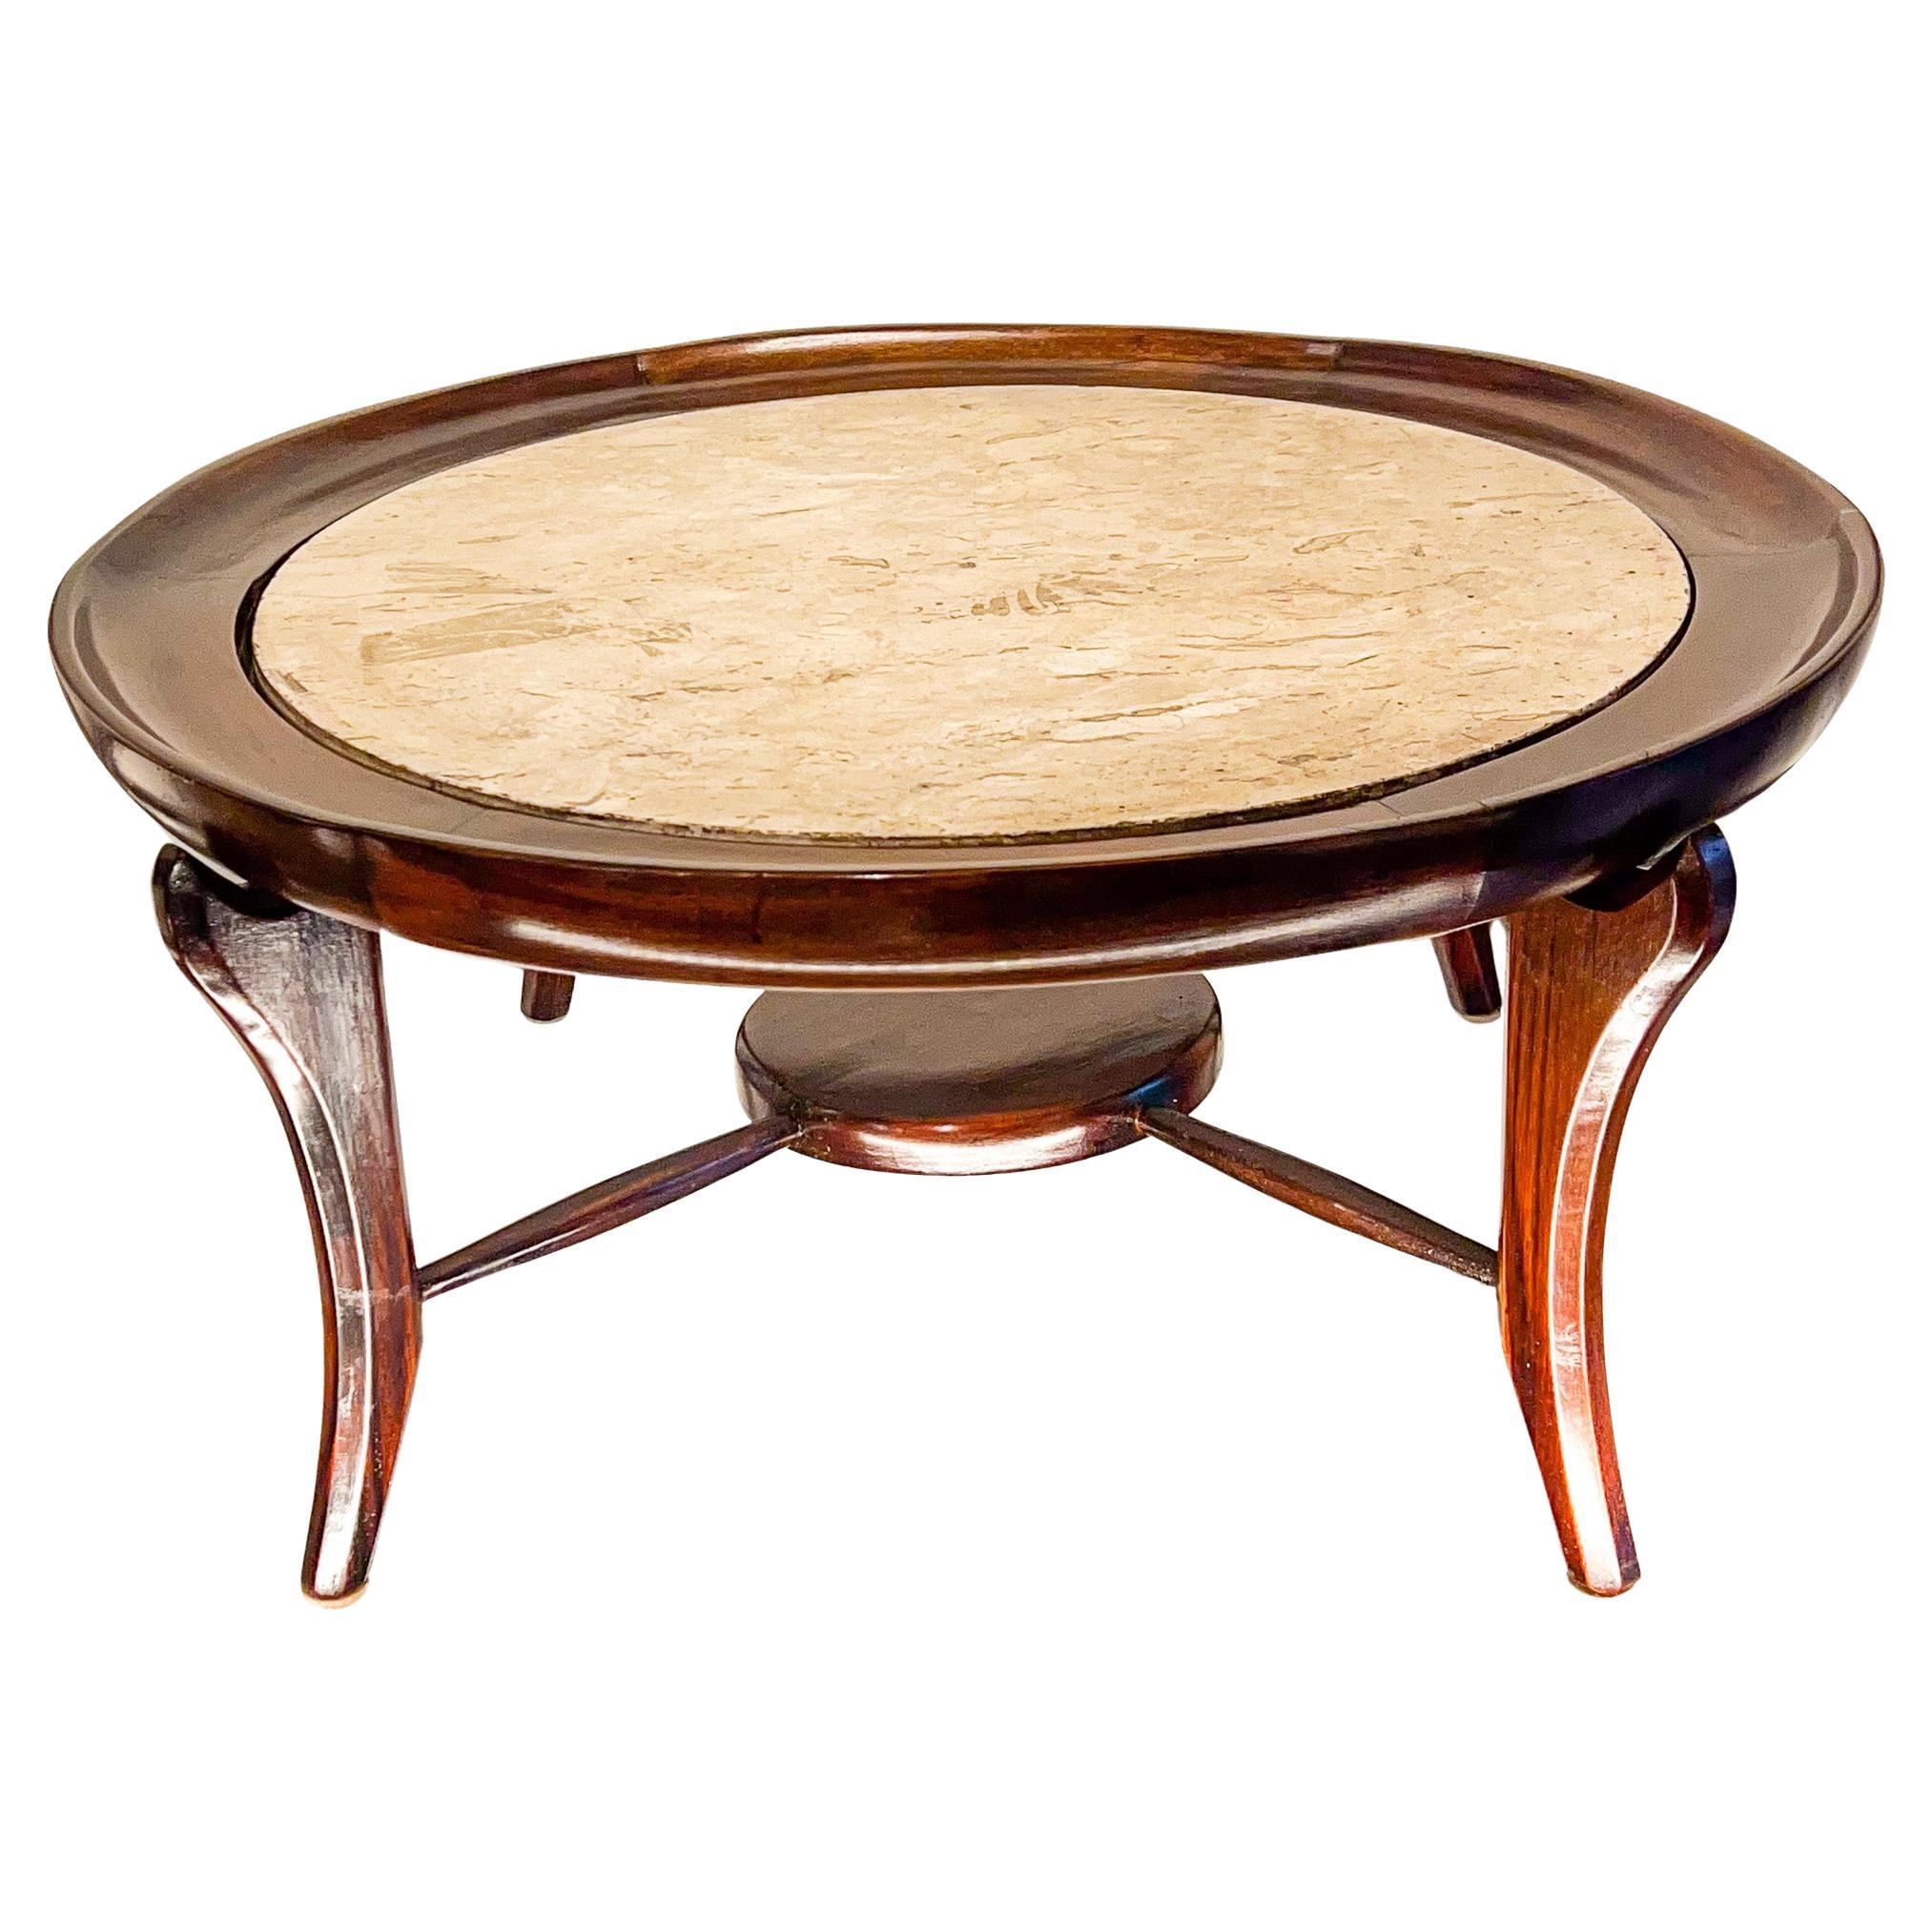 Mid-Century Modern Coffee Table in Hardwood&Travertine Giuseppe Scapinelli 1954 For Sale